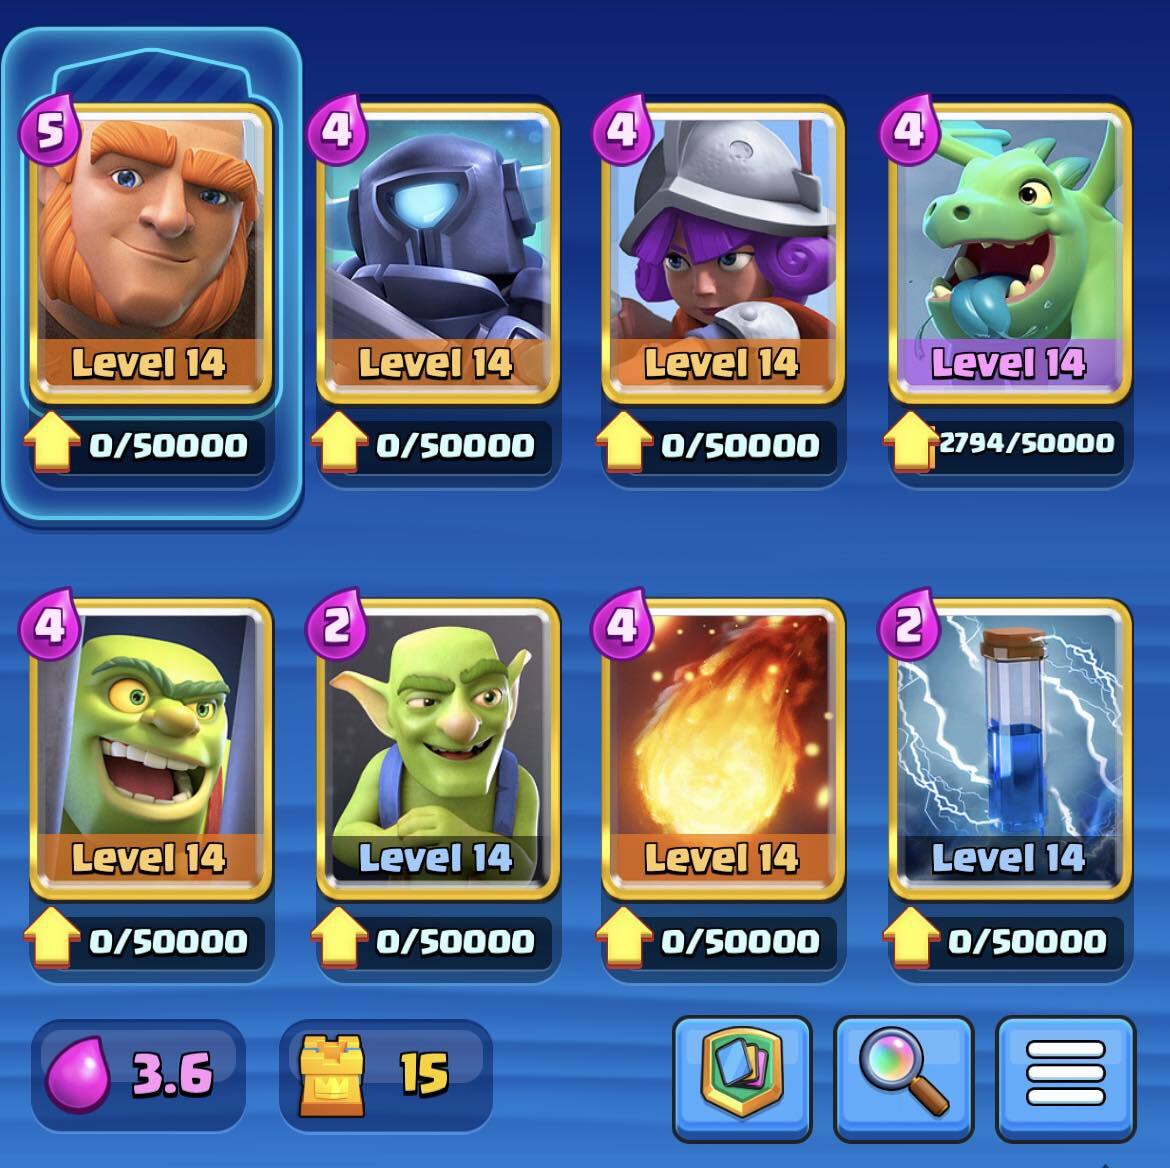 Clash Royale - Best Decks To Get to Arena 8 from Arena 7! Hog Rider, Golem,  Royal Giant, Balloon 